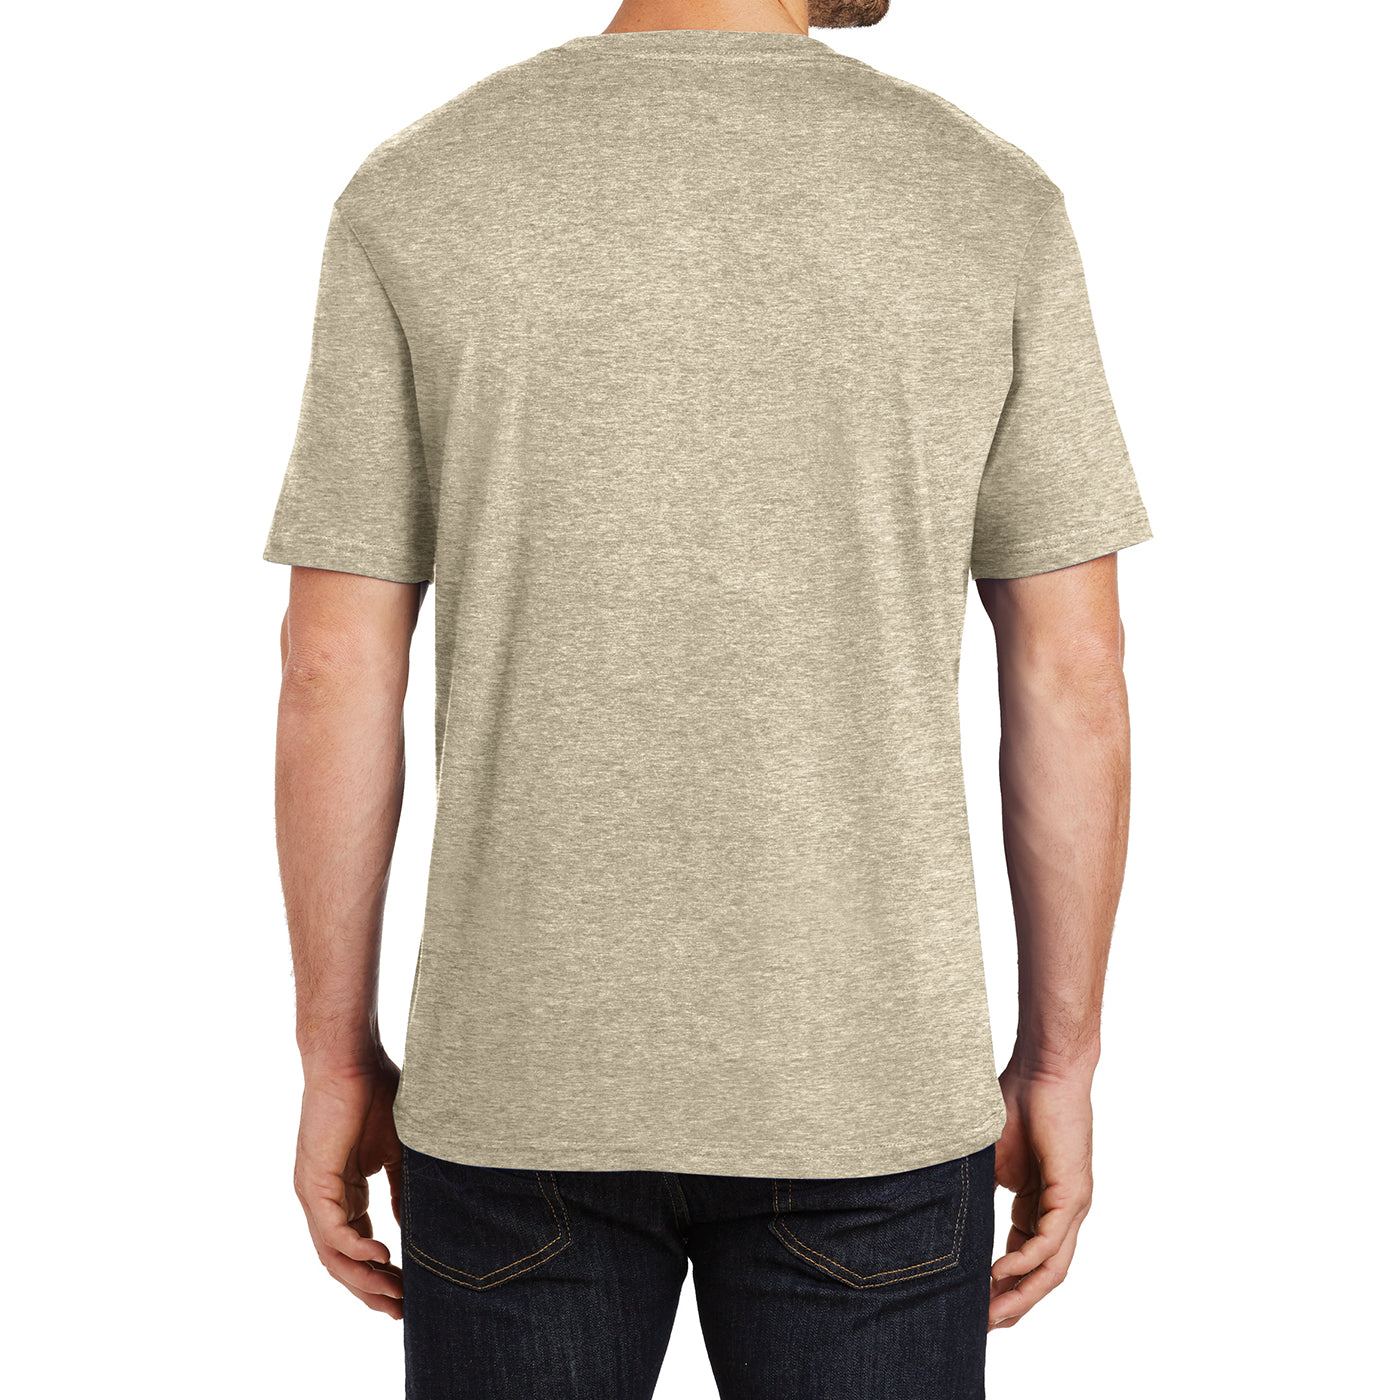 Mens Perfect Weight Crew Tee - Heathered Latte - Back